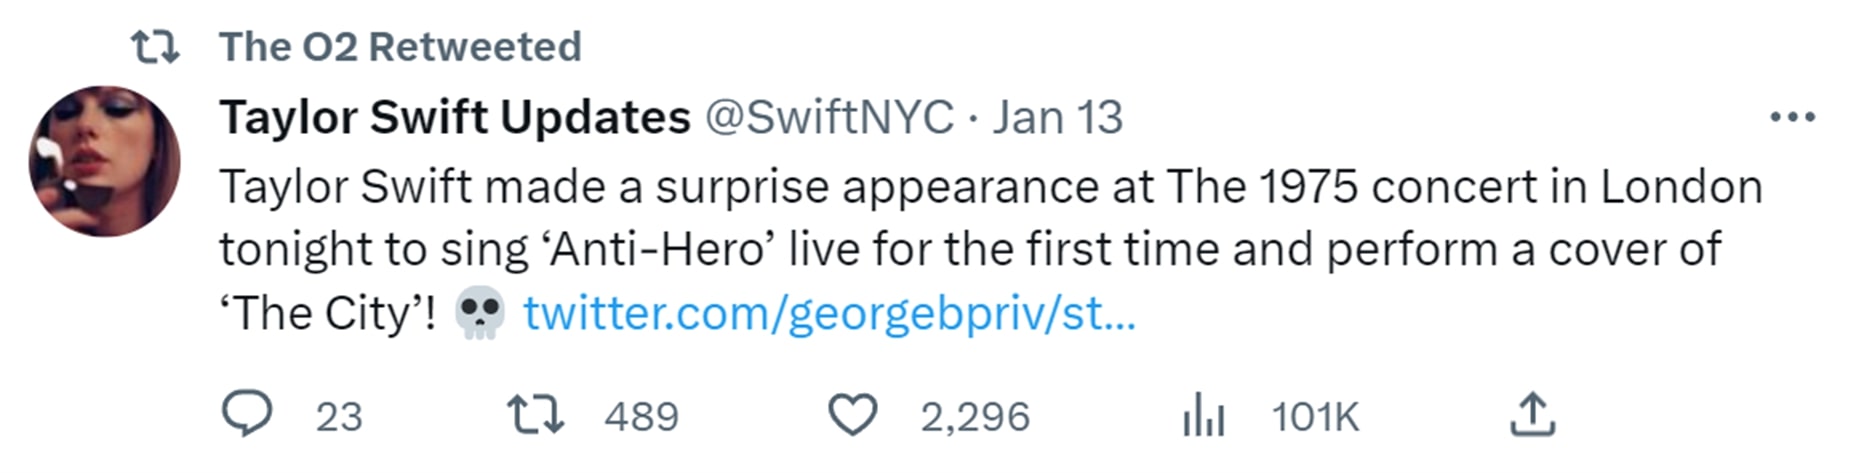 The O2 arena retweets tweet from "Taylor Swift Updates" fan account